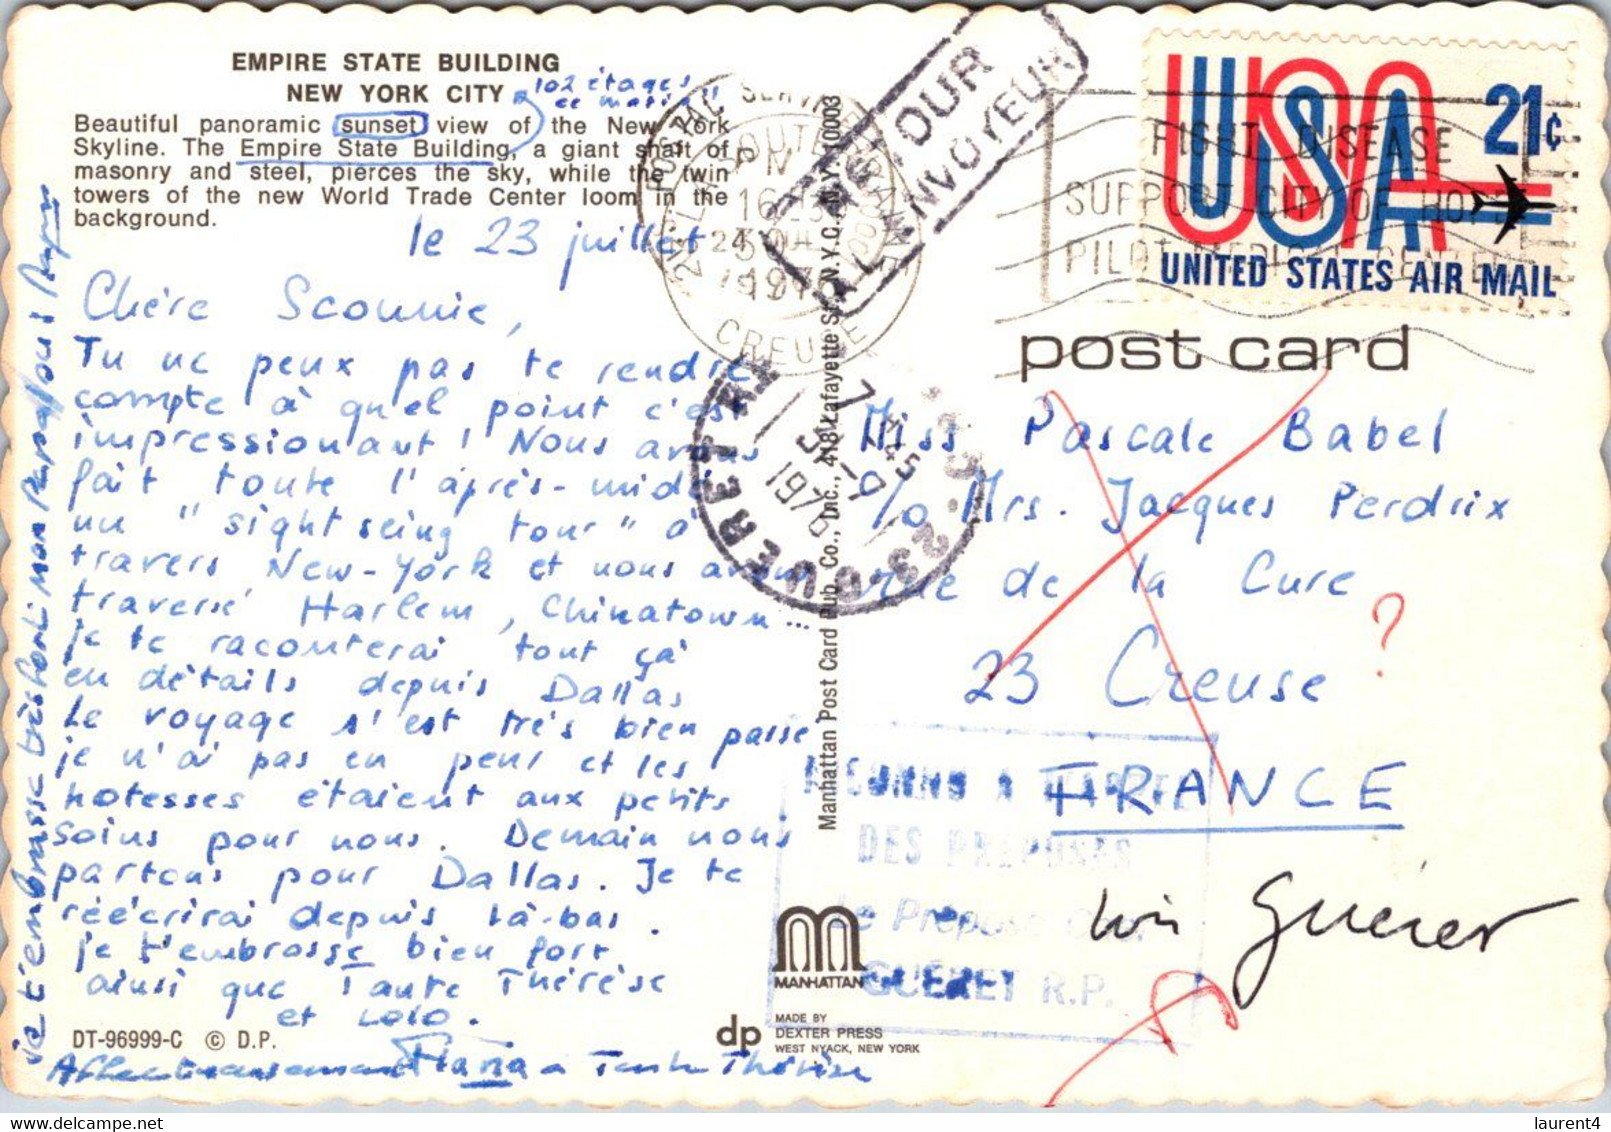 (2 Oø 12) USA Posted To France - Empire State Building (posted 1976) RTS - Return To Sender - Retour A L'Envoyeur - Empire State Building